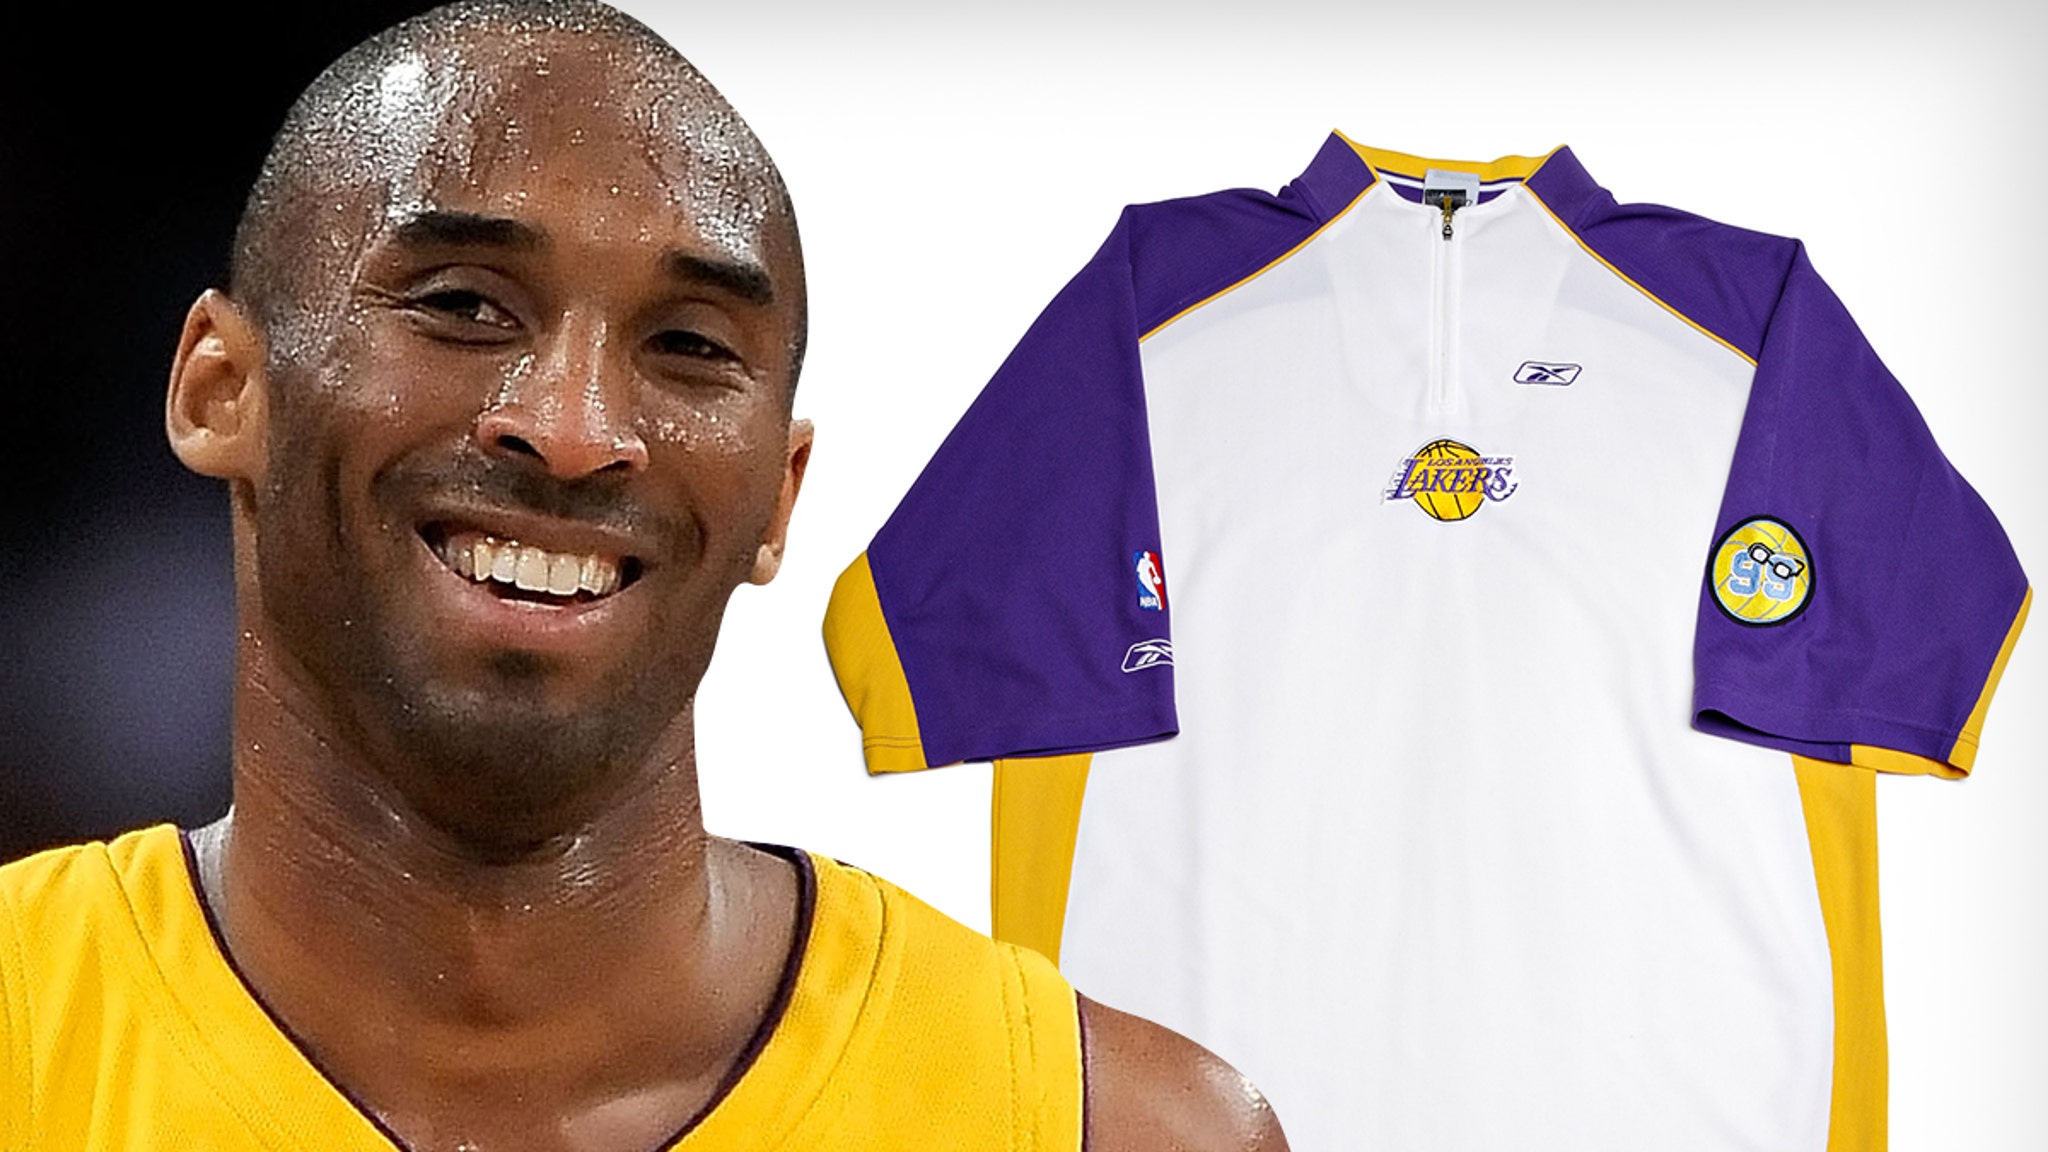 Watch: Jersey Worn By Kobe Bryant During 81 Point Game In 2006 Up For  Auction